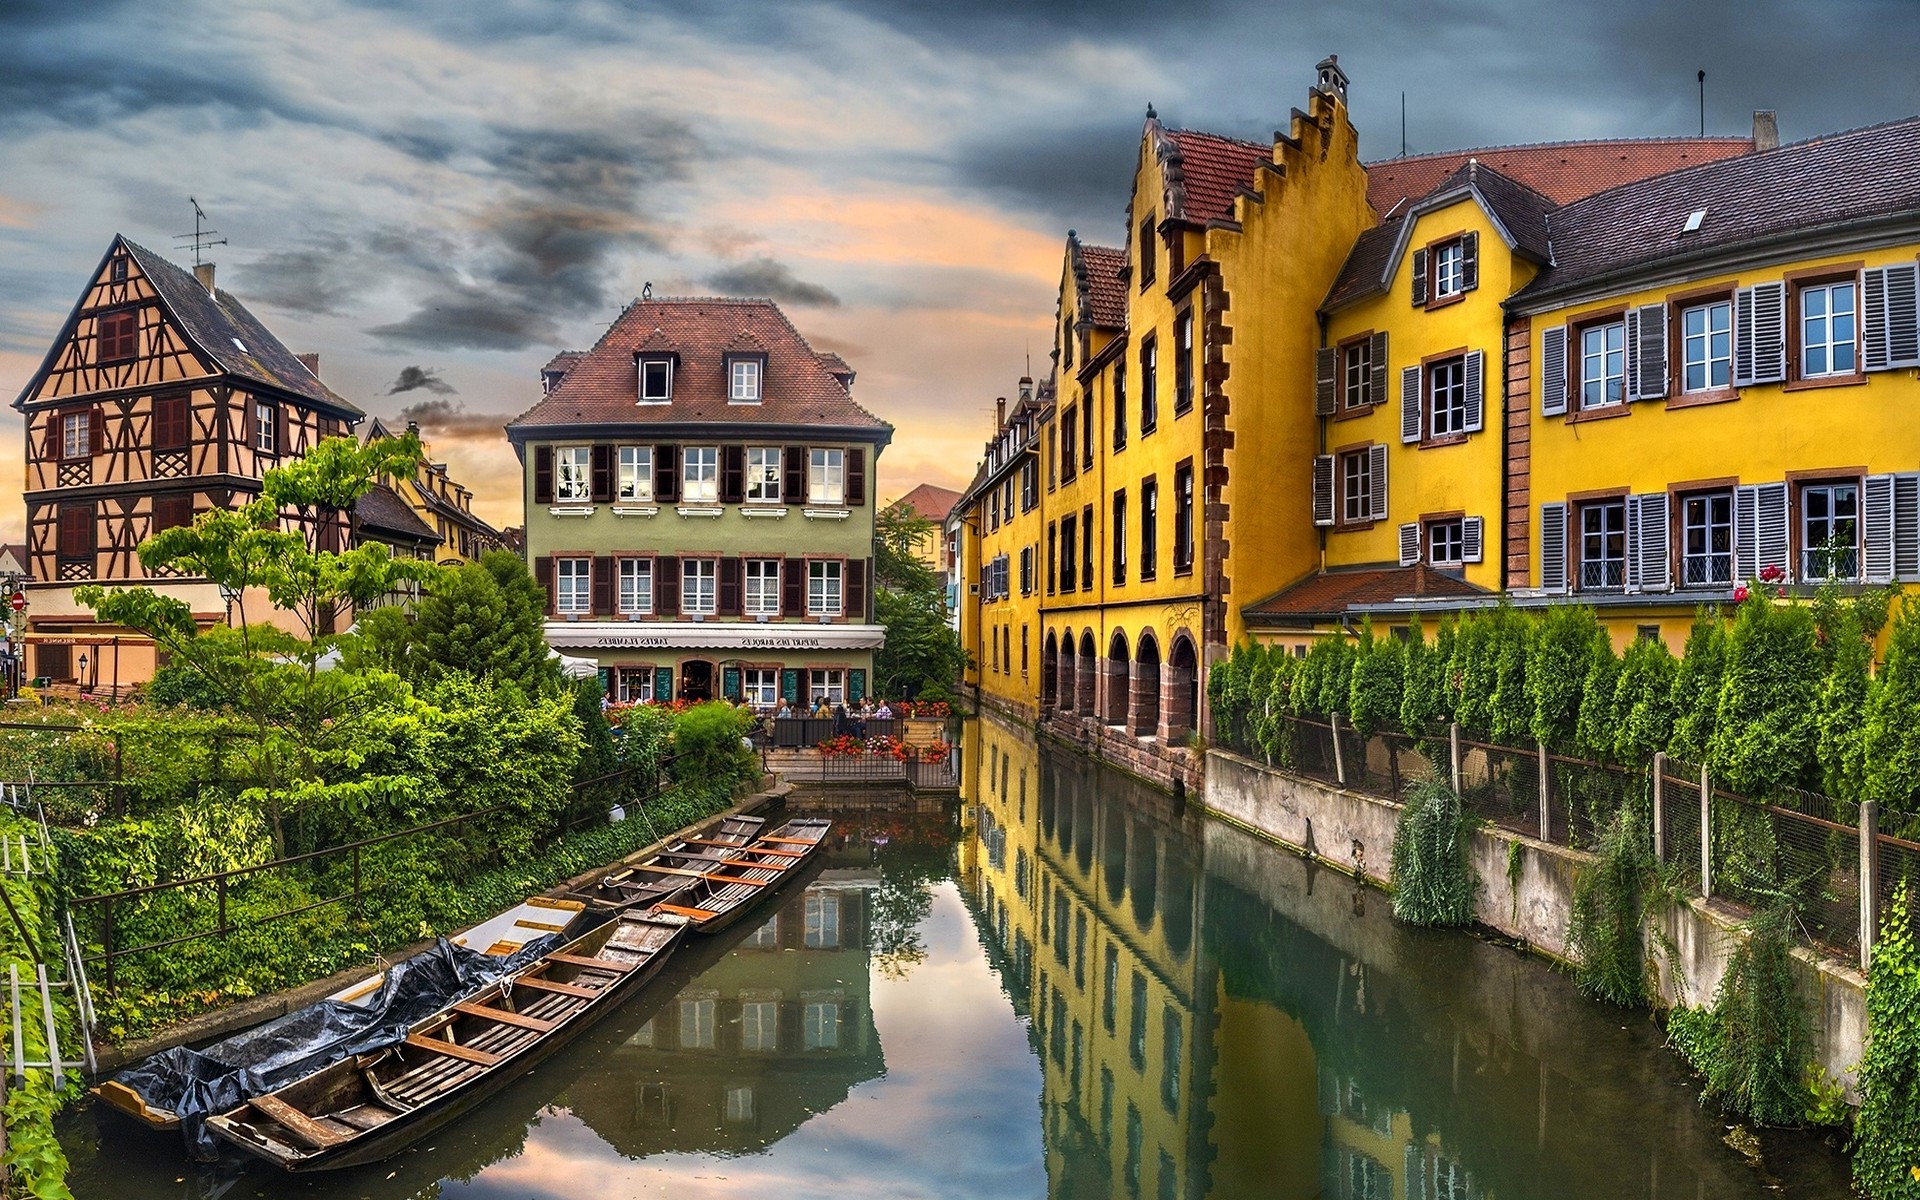 man made, colmar, building, canal, france, house, towns